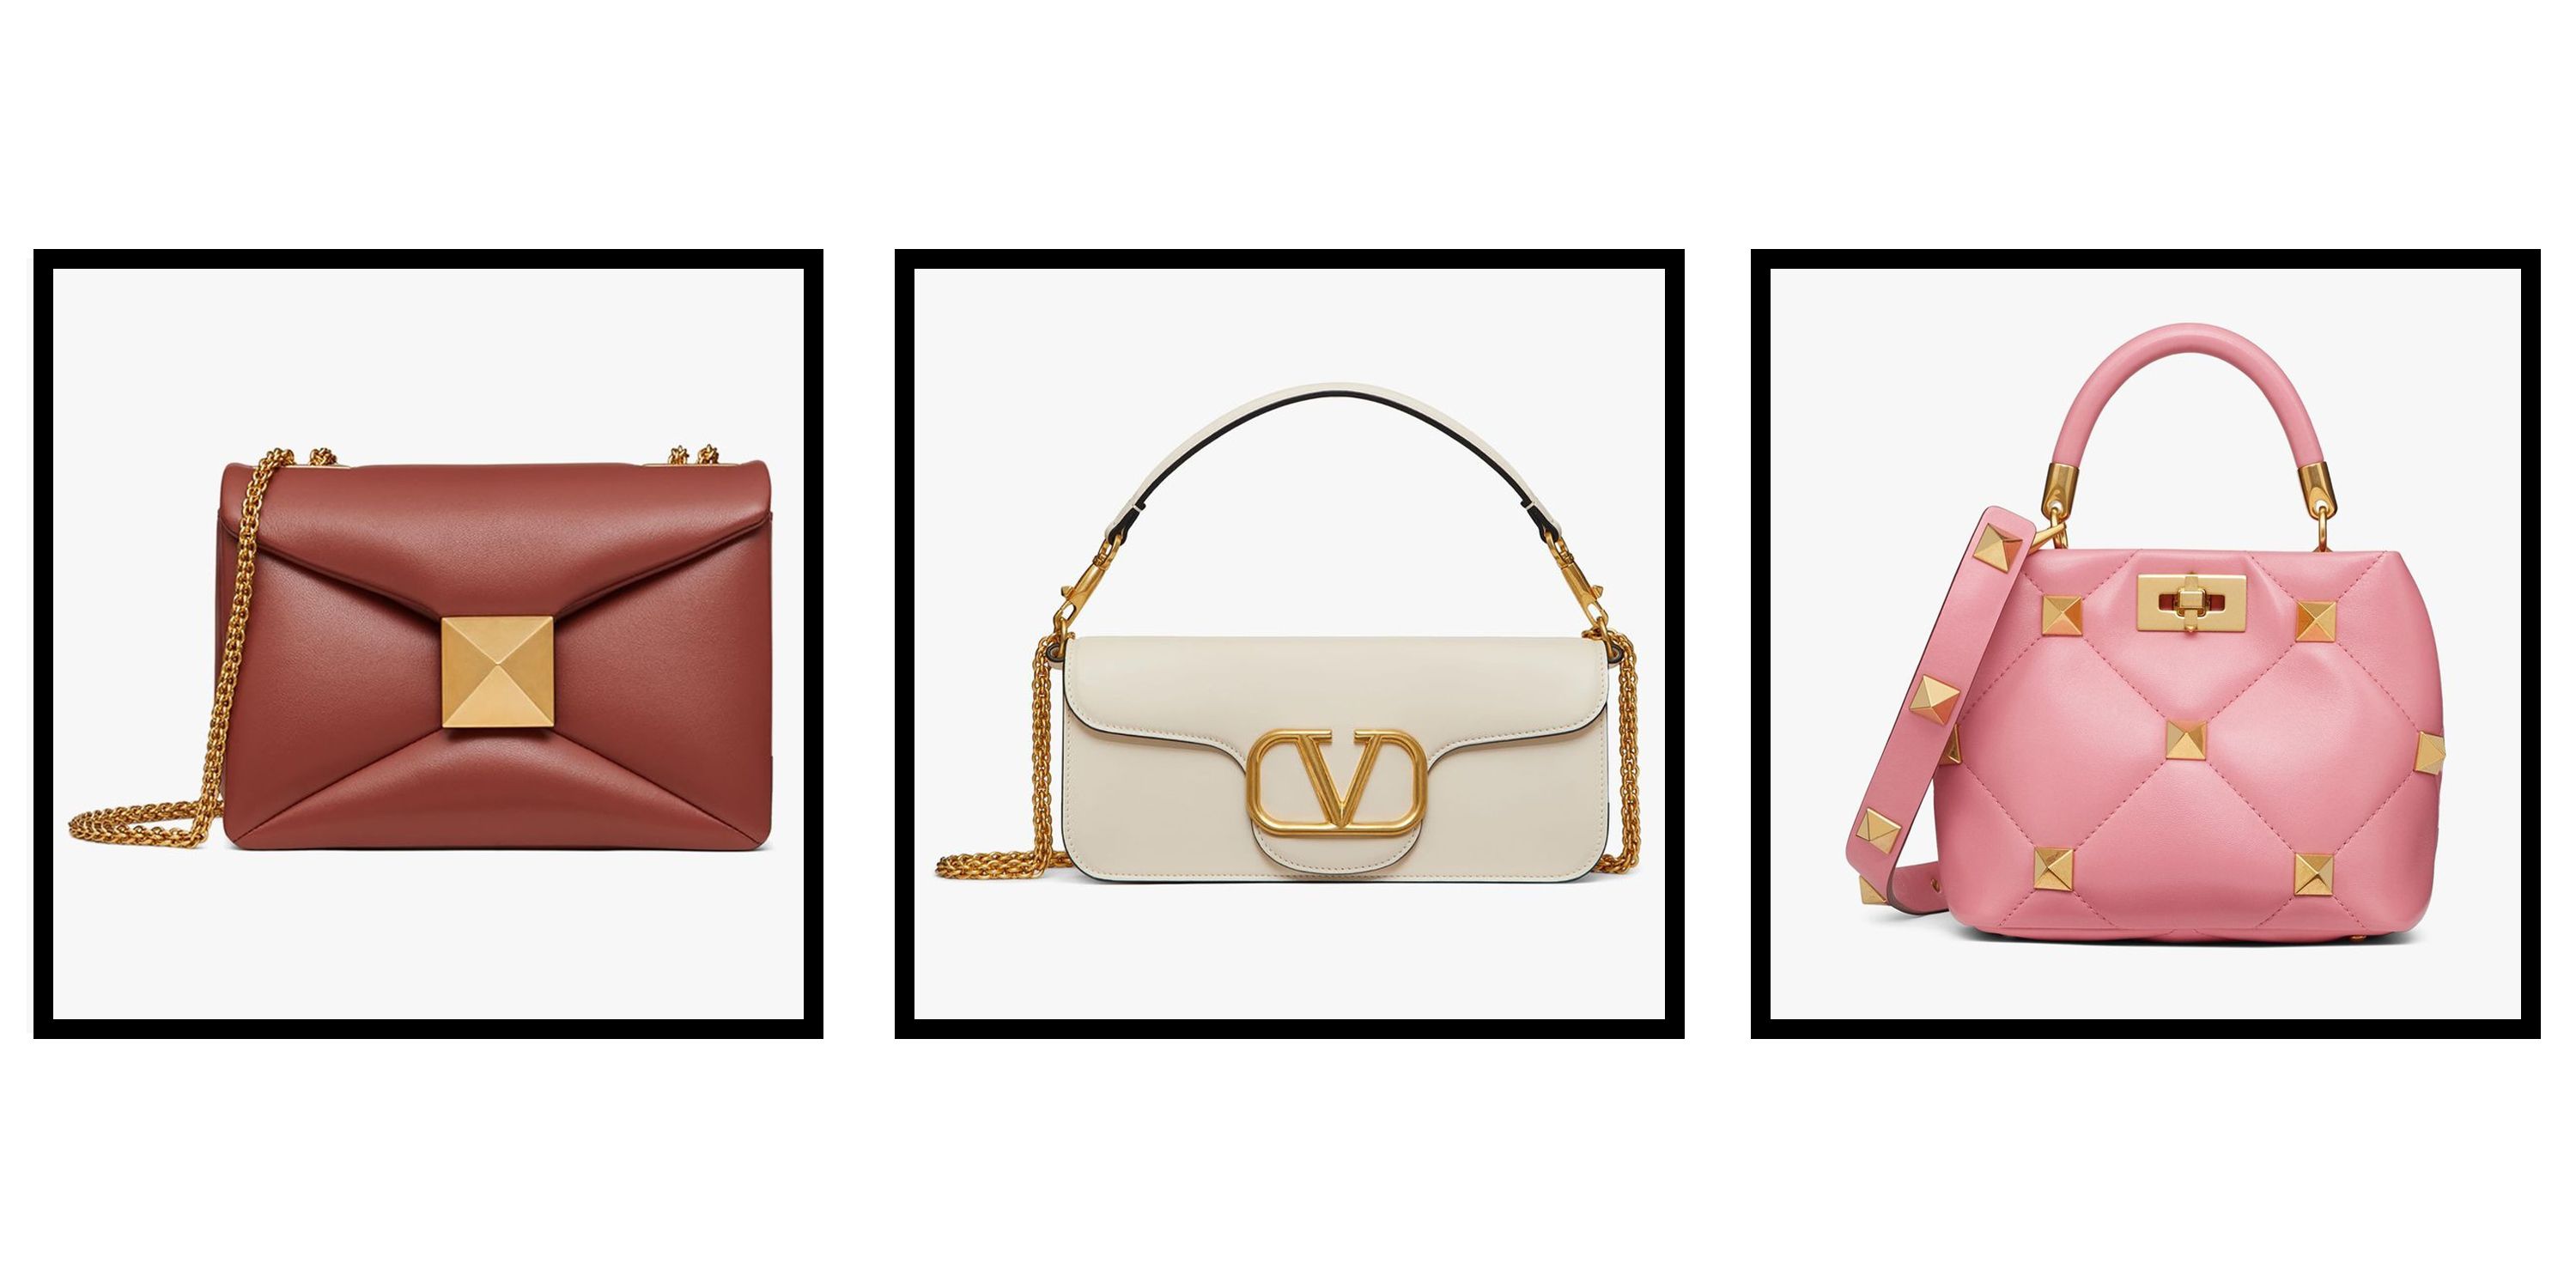 The Must Have Valentino Accessories For The New Season, According To Marina